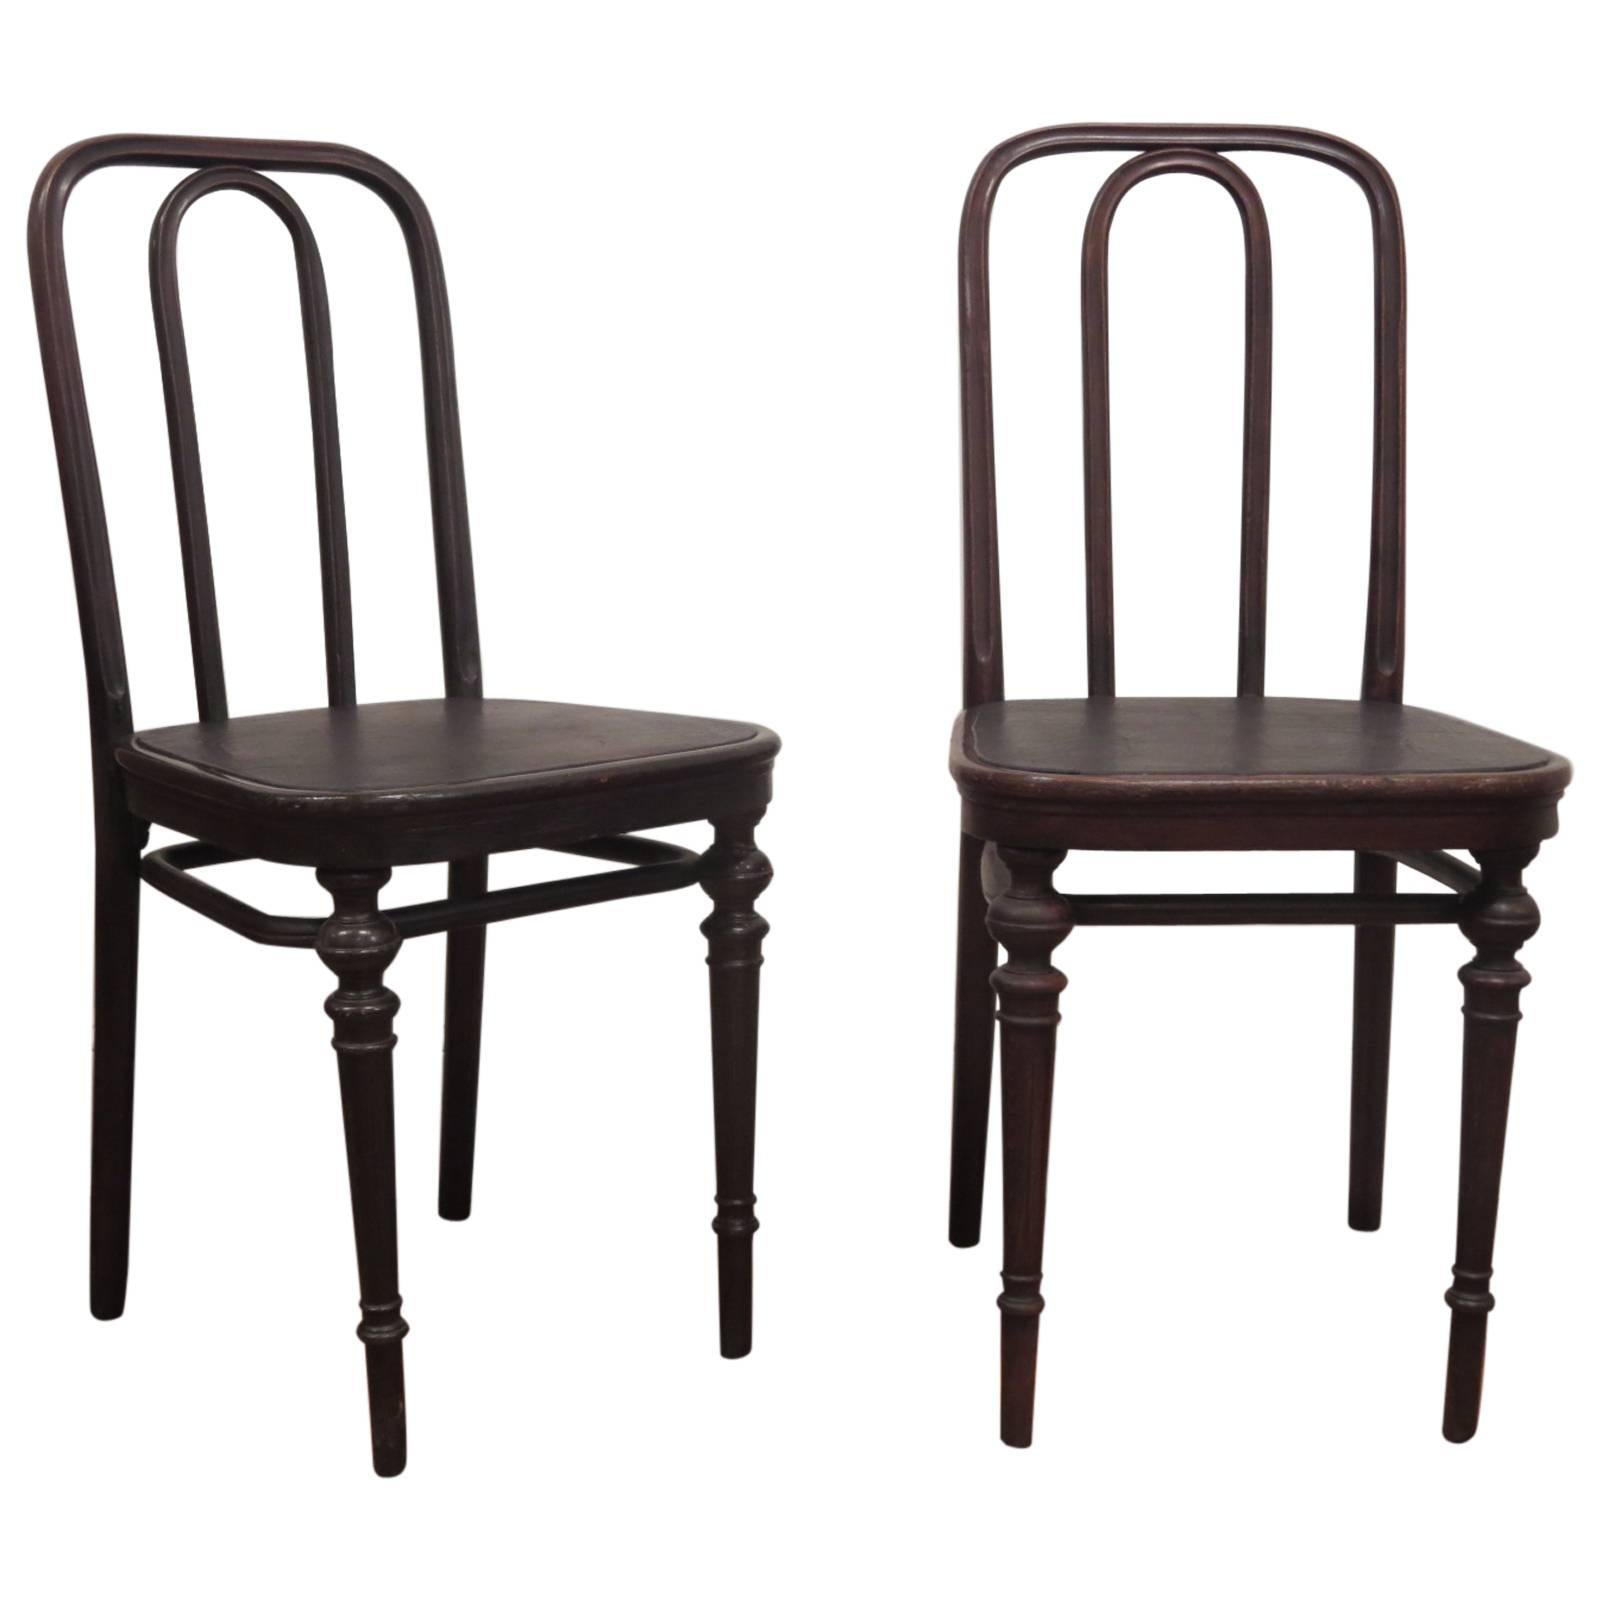 Pair of Chairs 41 by Thonet